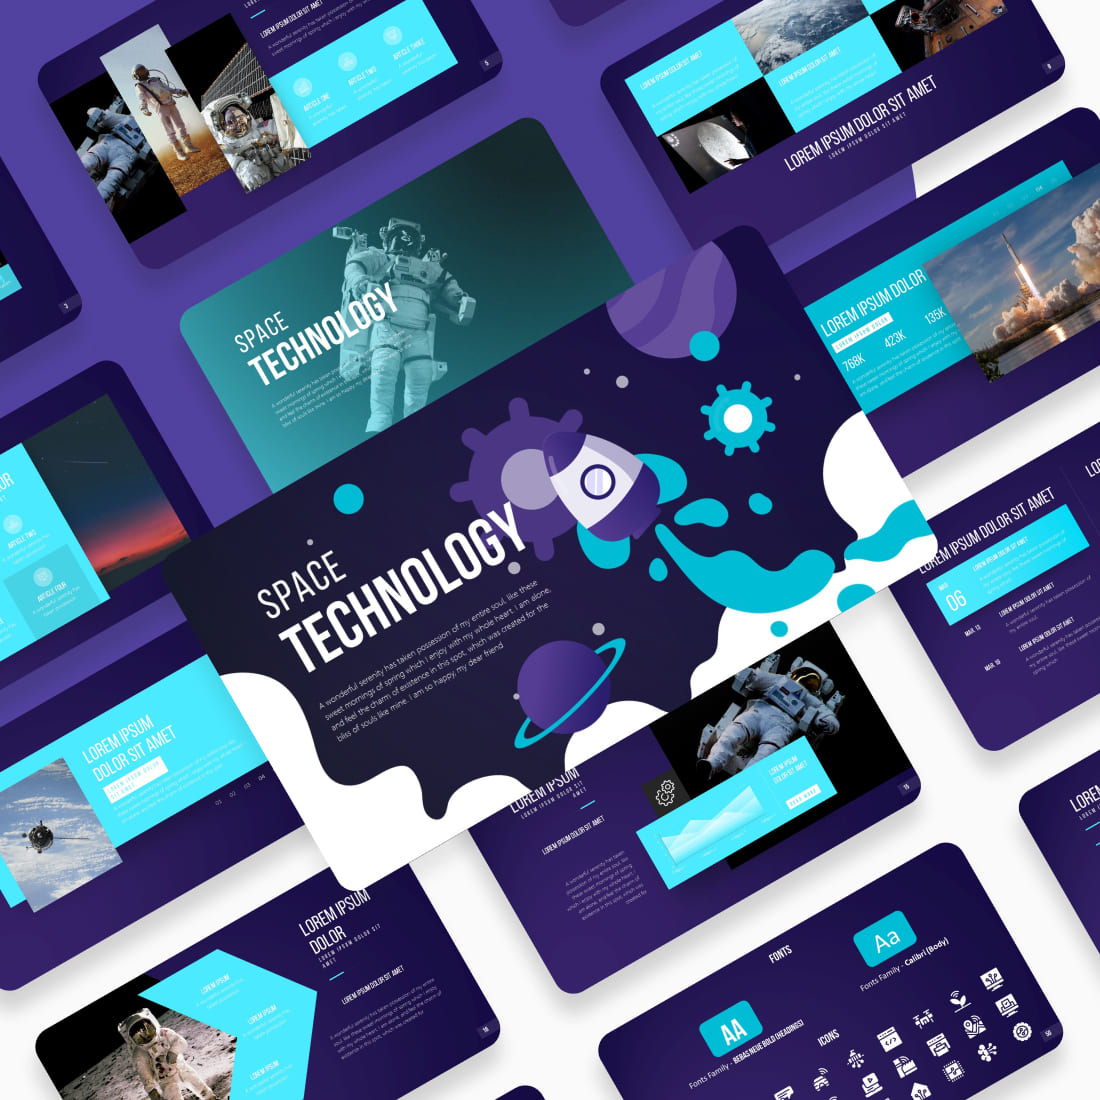 Space Technology PowerPoint Template cover image.